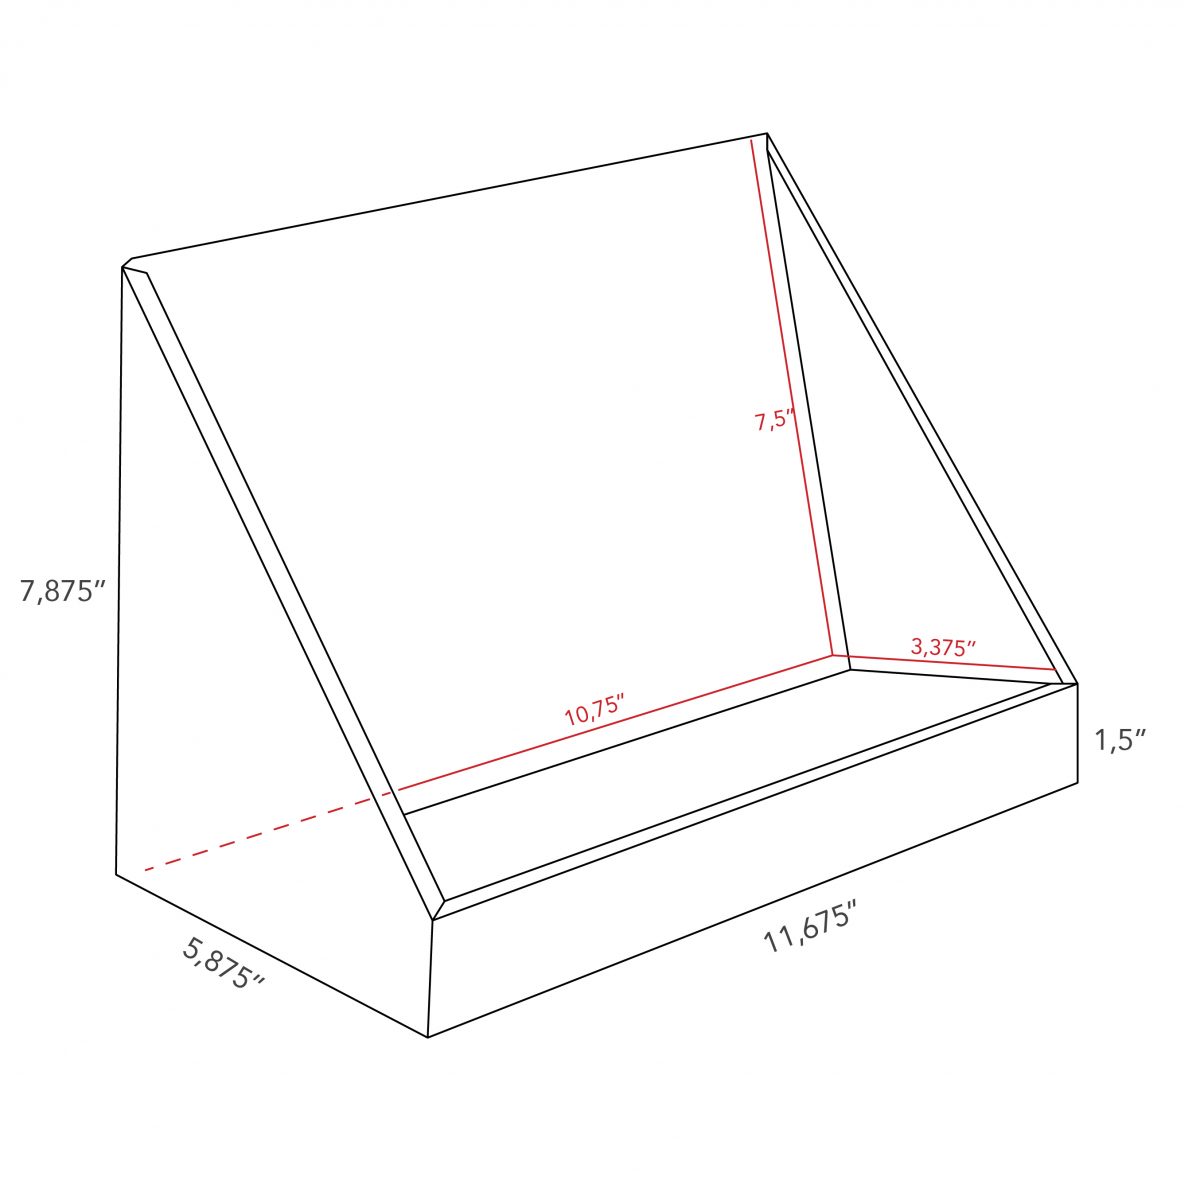 Angled Cardboard counter display - dimensions